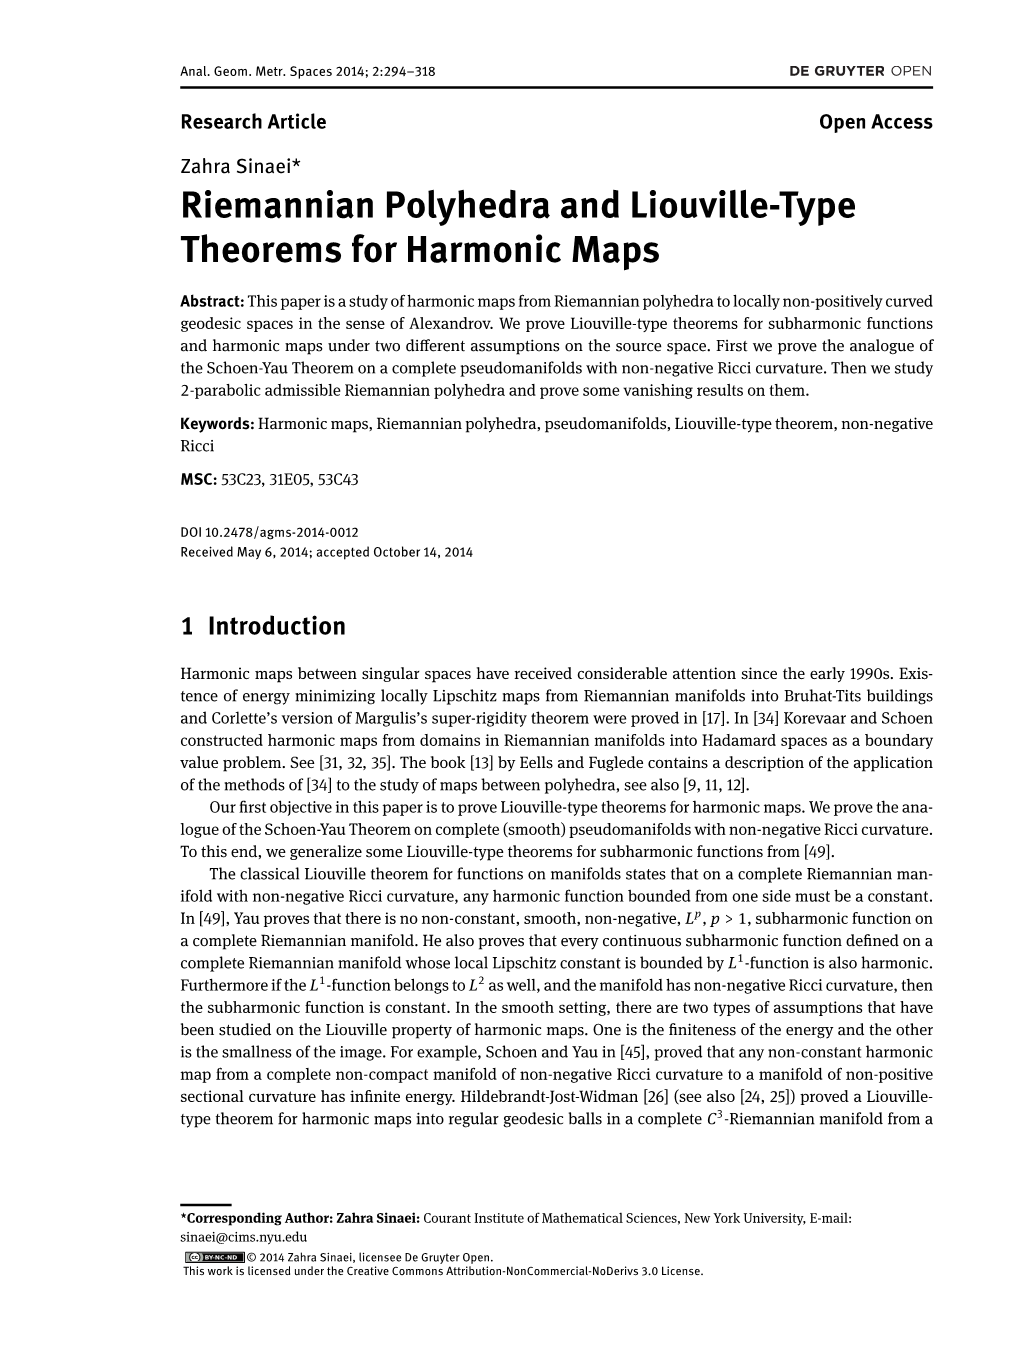 Riemannian Polyhedra and Liouville-Type Theorems for Harmonic Maps